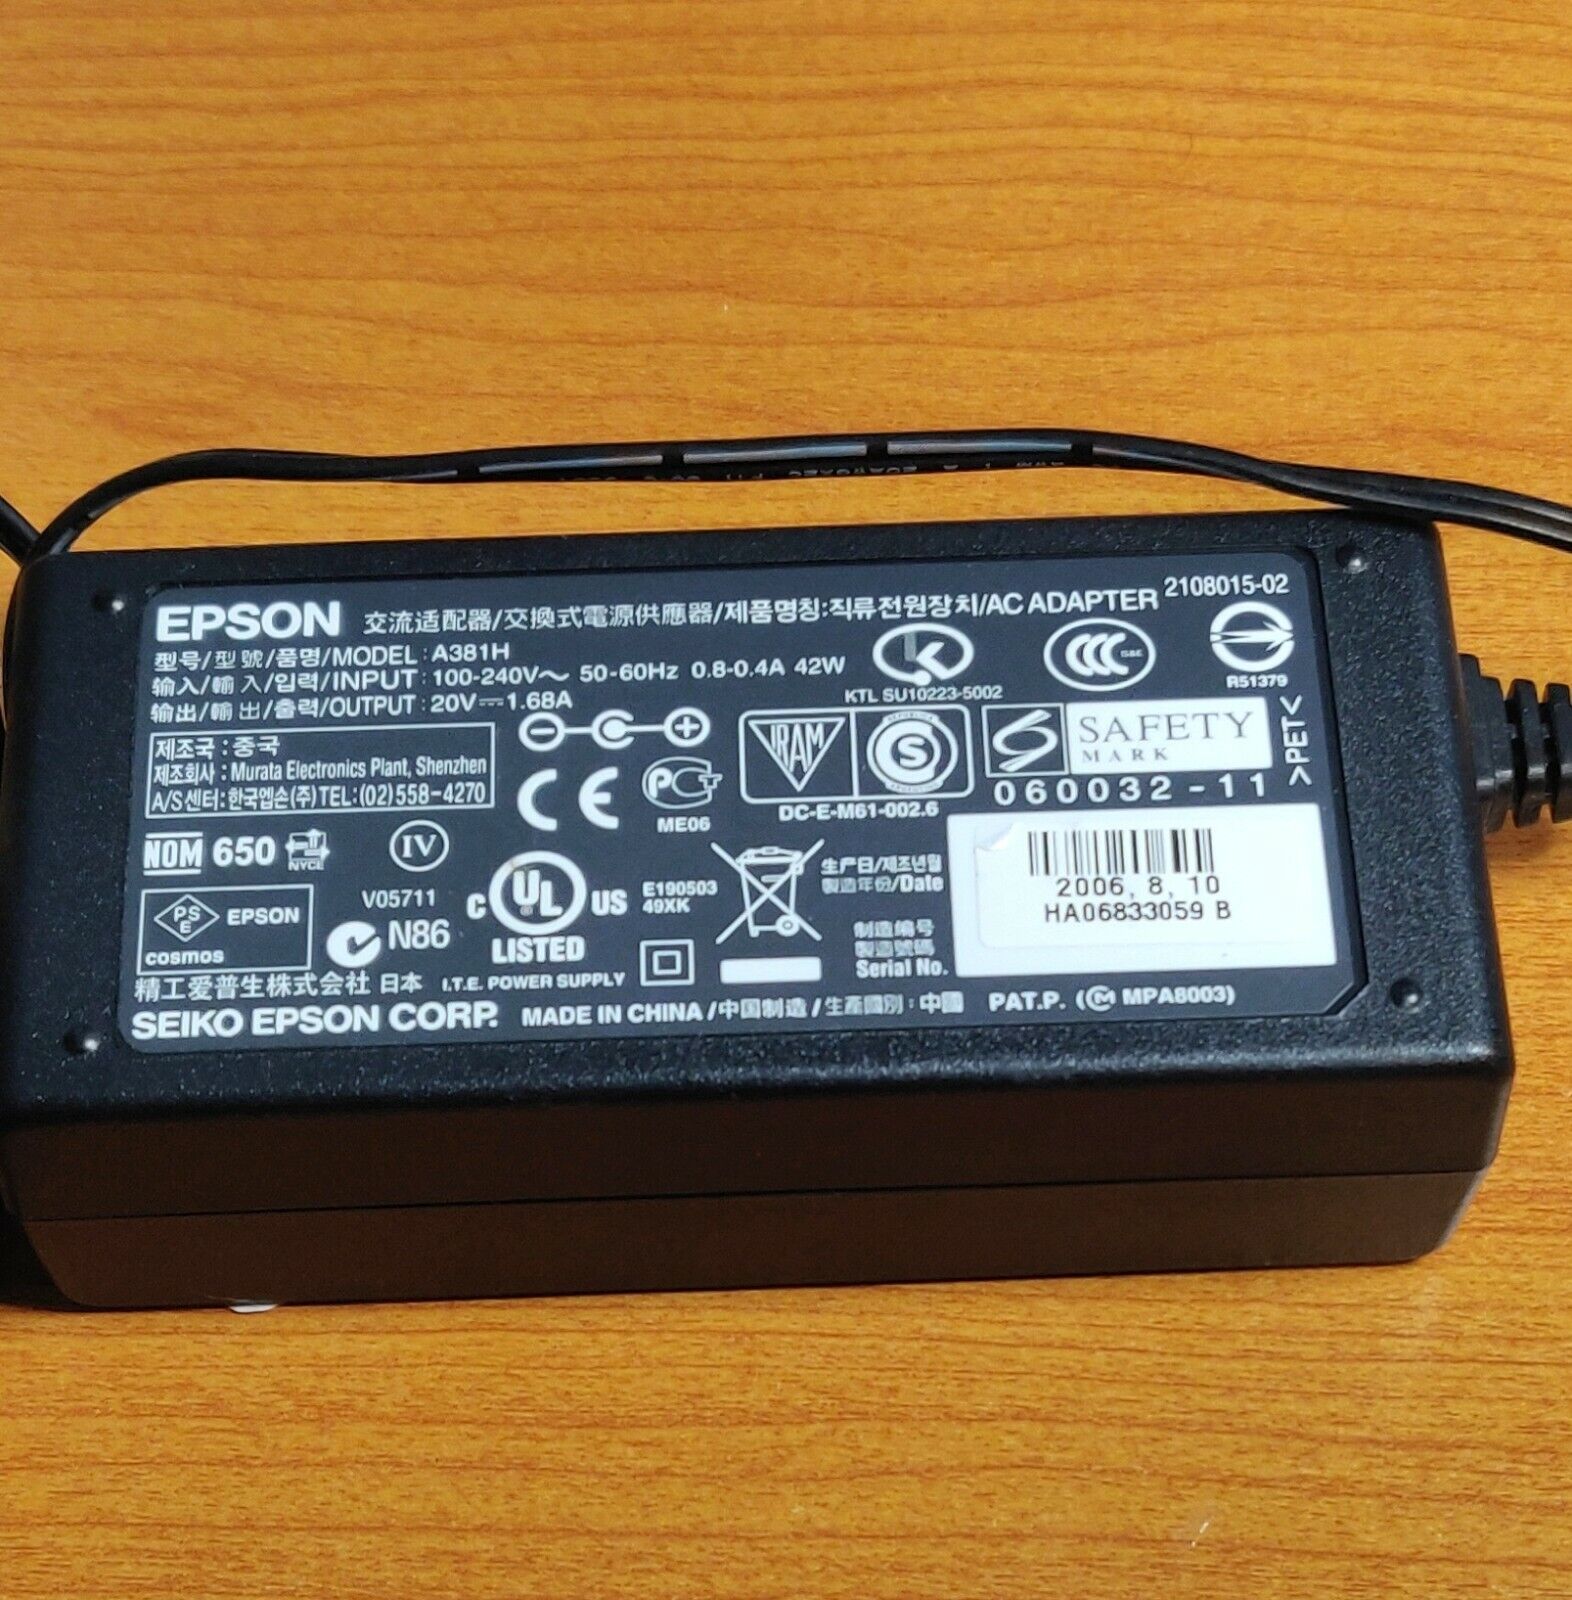 Genuine OEM Epson AC Adapter Model A381H 20V - 1.68A Used in Good Condition